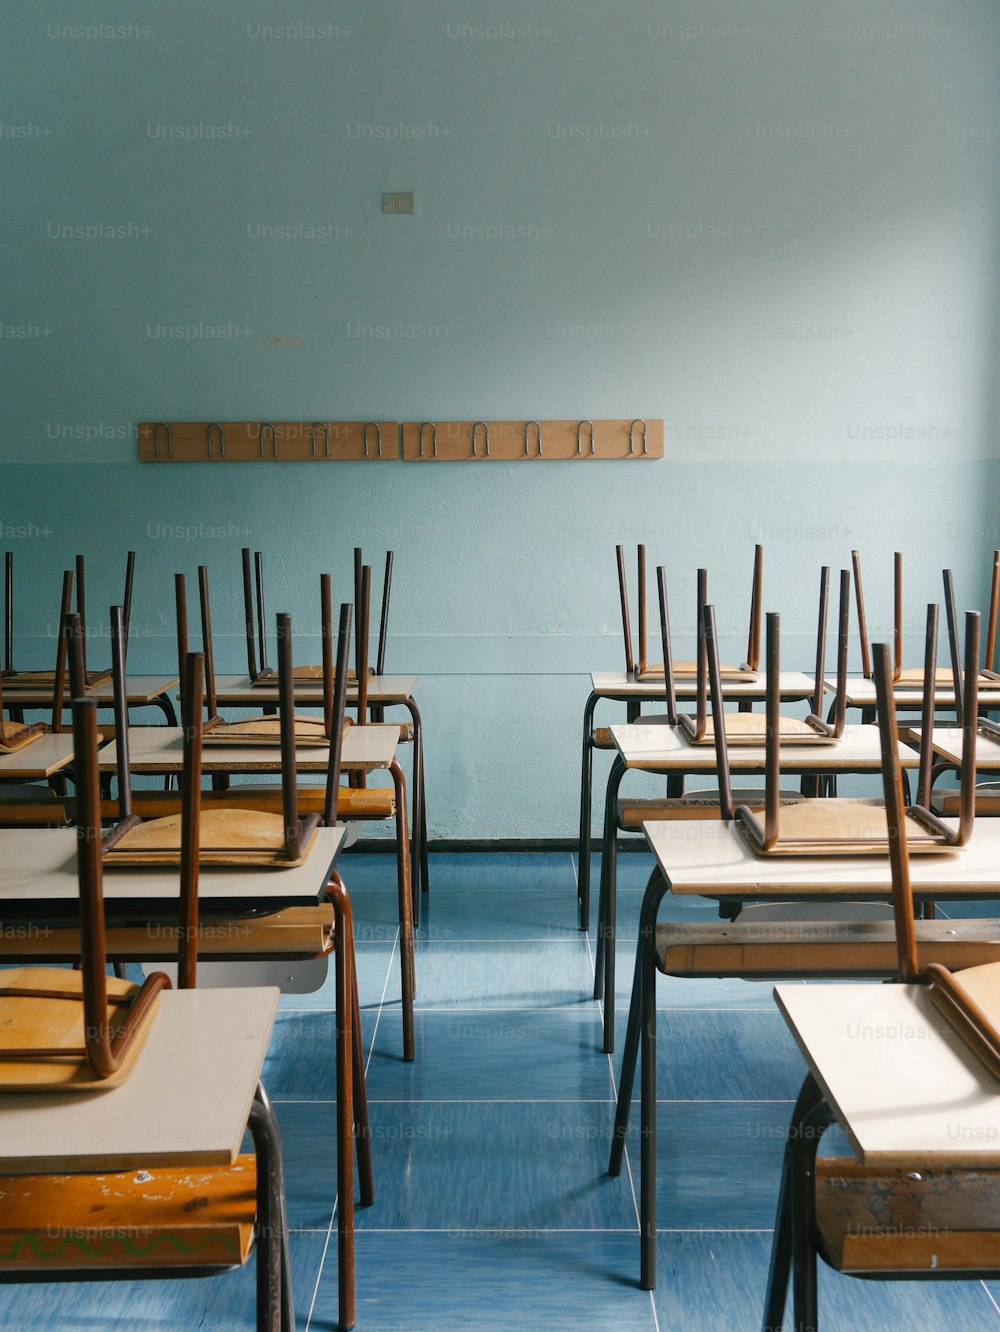 a row of wooden desks in a classroom